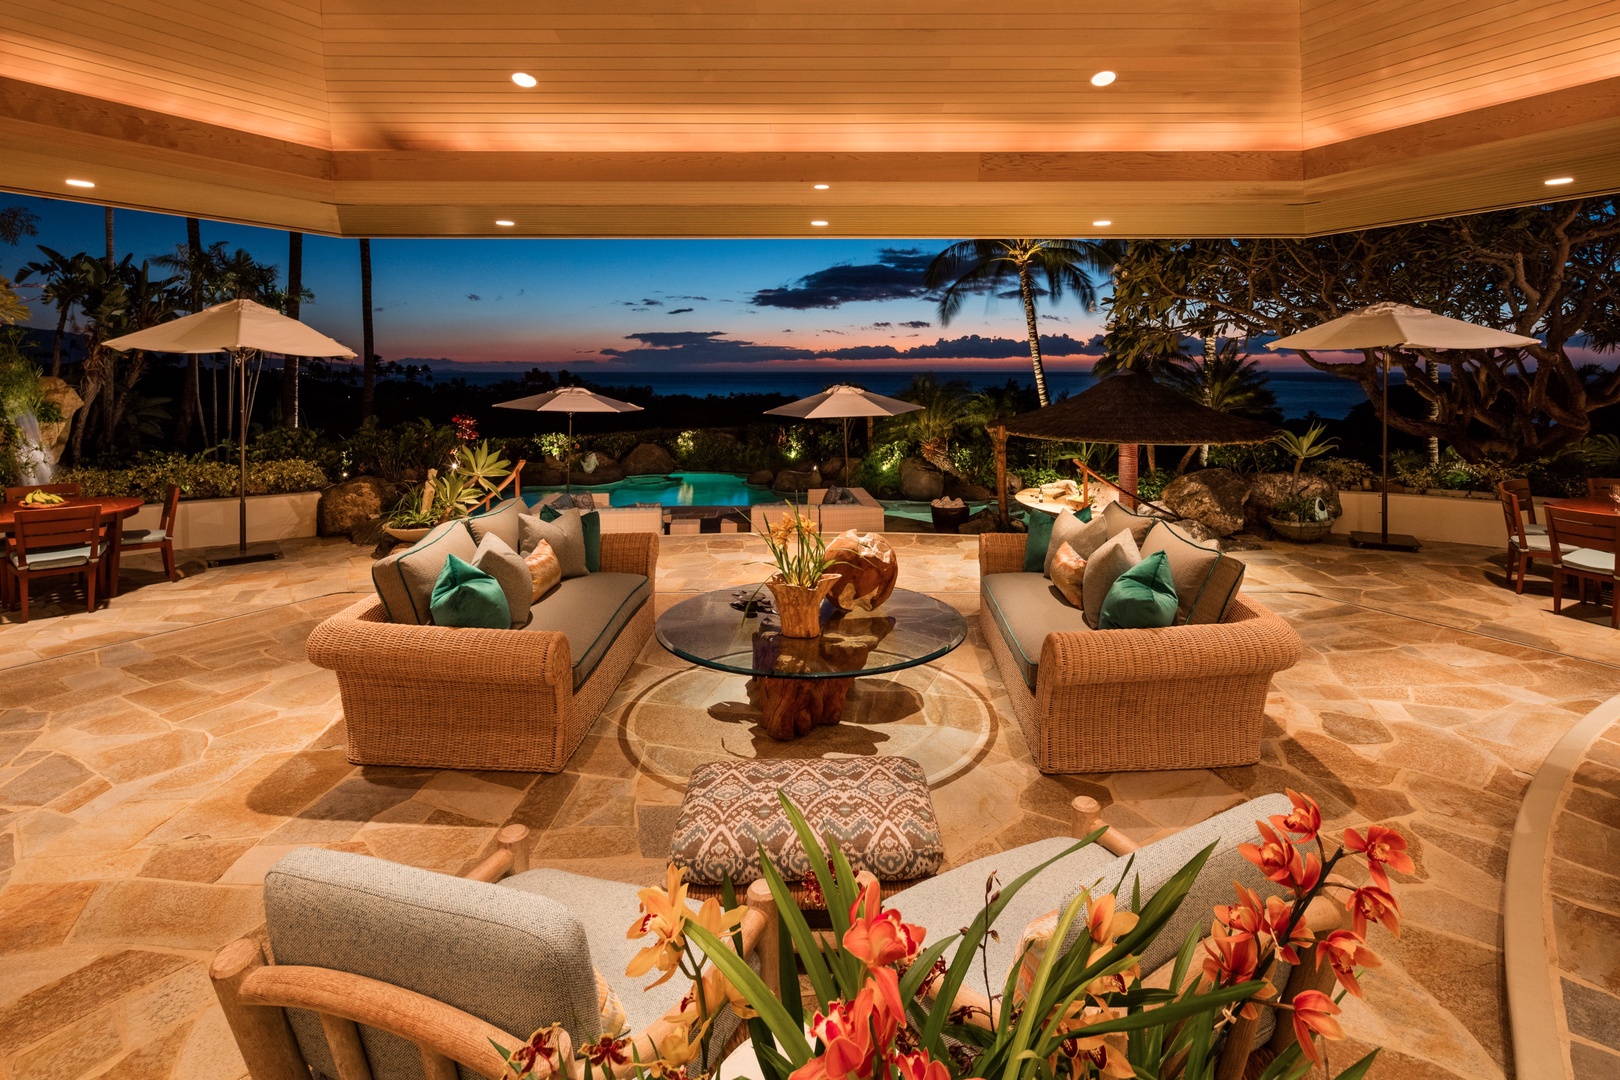 Kamuela Vacation Rentals, 5BD Fairways North (1) Estate Home at Mauna Kea Resort - View from foyer of elegant and open great room. Sliding glass pocket Doors open completely on three sides. High octagonal ceiling with skylight. Ocean and sunset views.